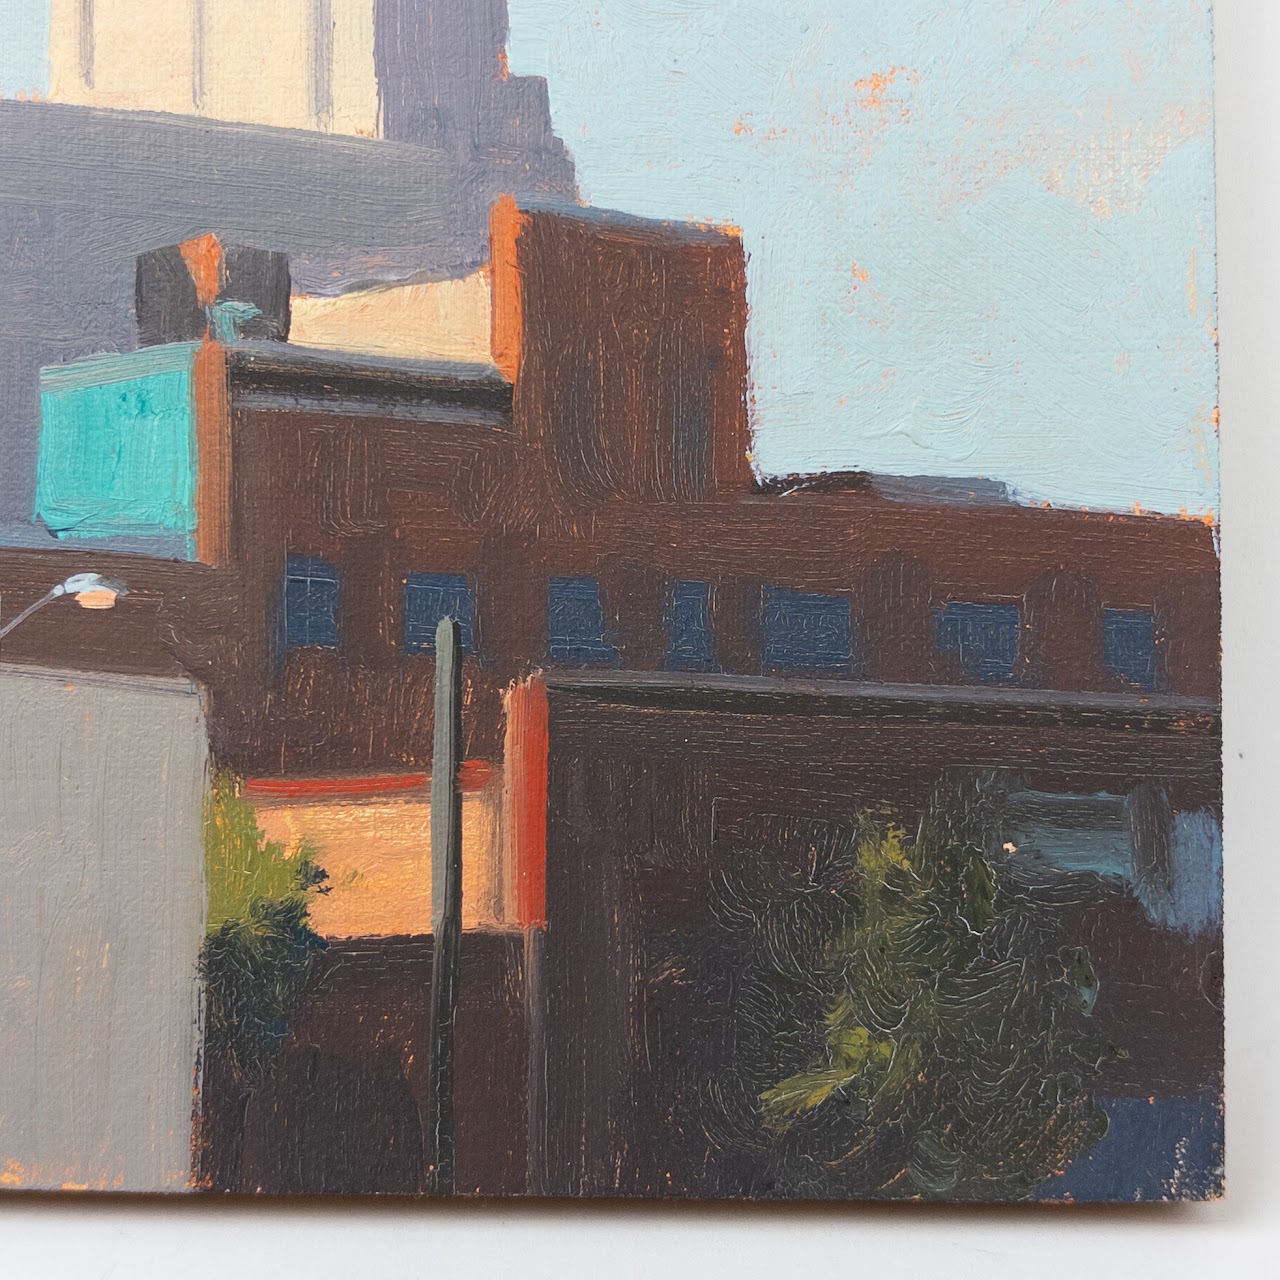 Stephen Magsig "Eastern Market Shadows" Small Painting